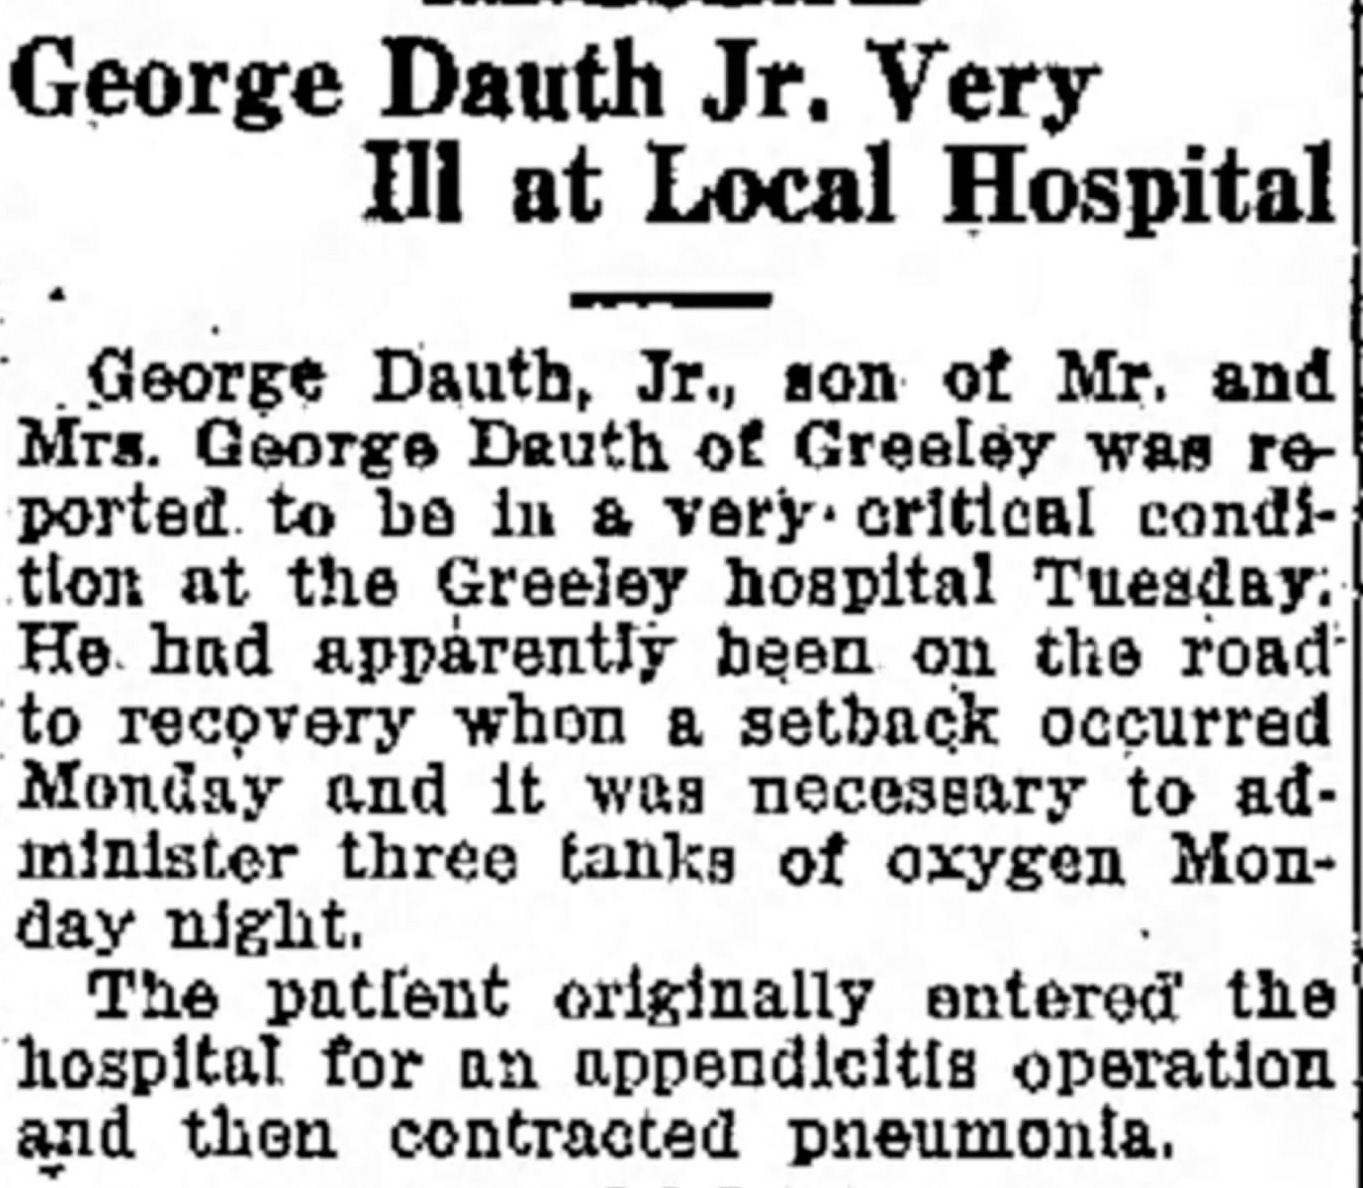 Dauth Family Archive - 1932-05-03 - Greeley Daily Tribune - June Dauth Very Ill